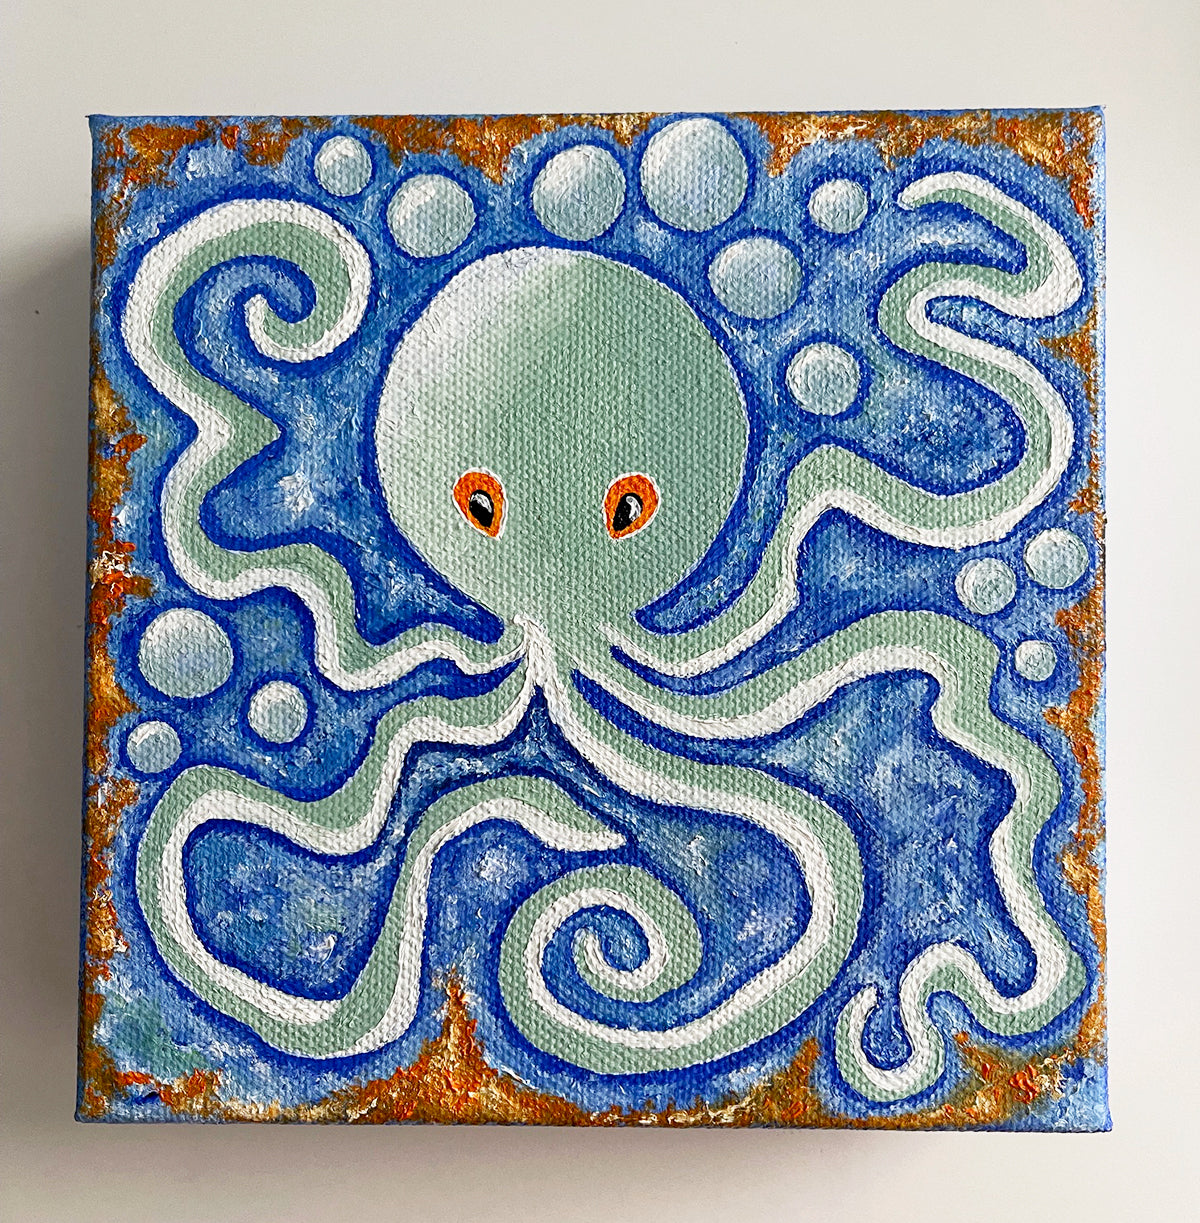 6" X 6" Octopus Oil Painitng